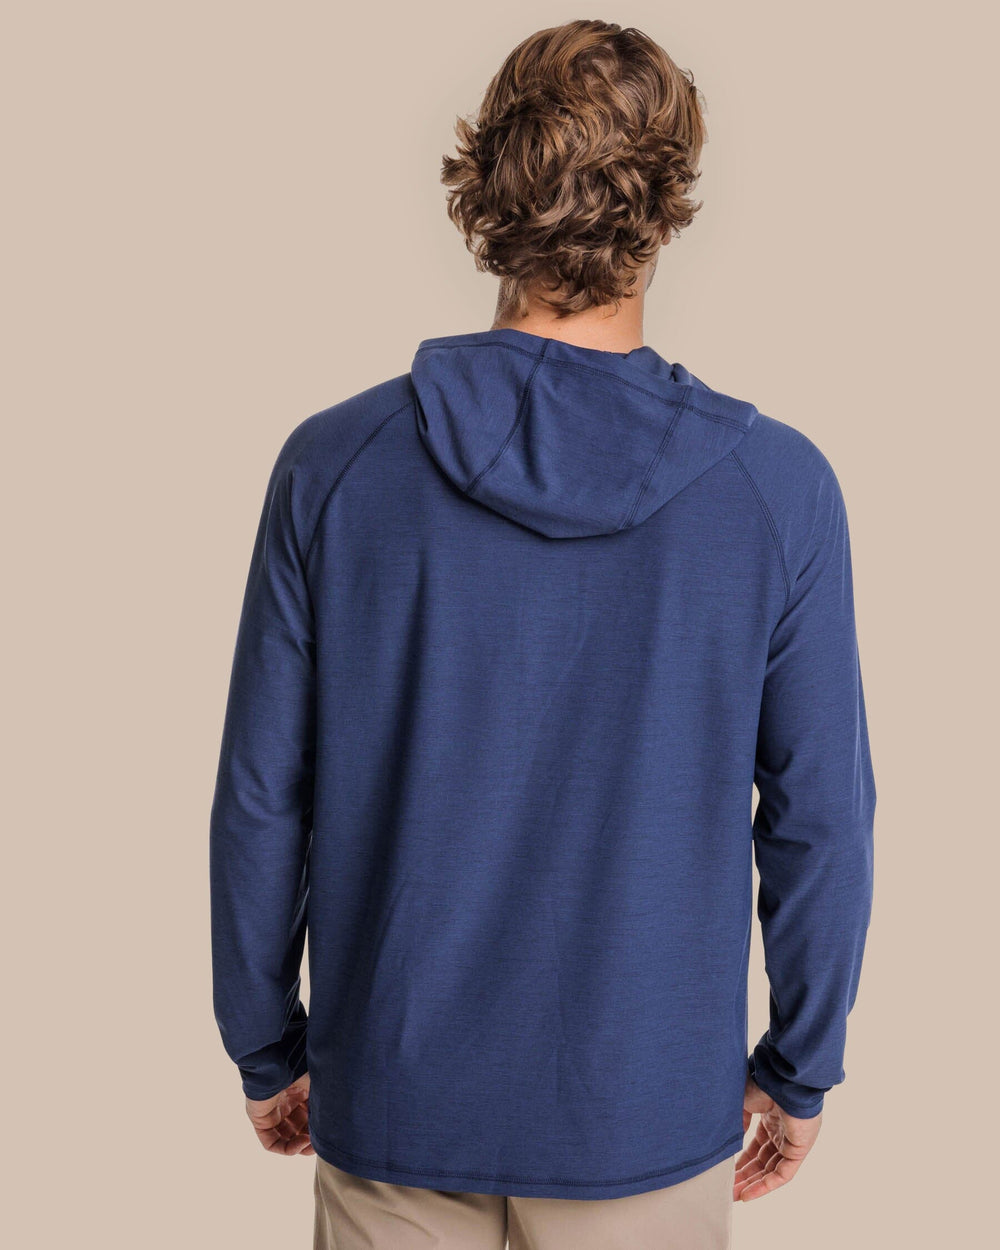 The back view of the Southern Tide brrr°®-illiant Performance Hoodie by Southern Tide - Nautical Navy